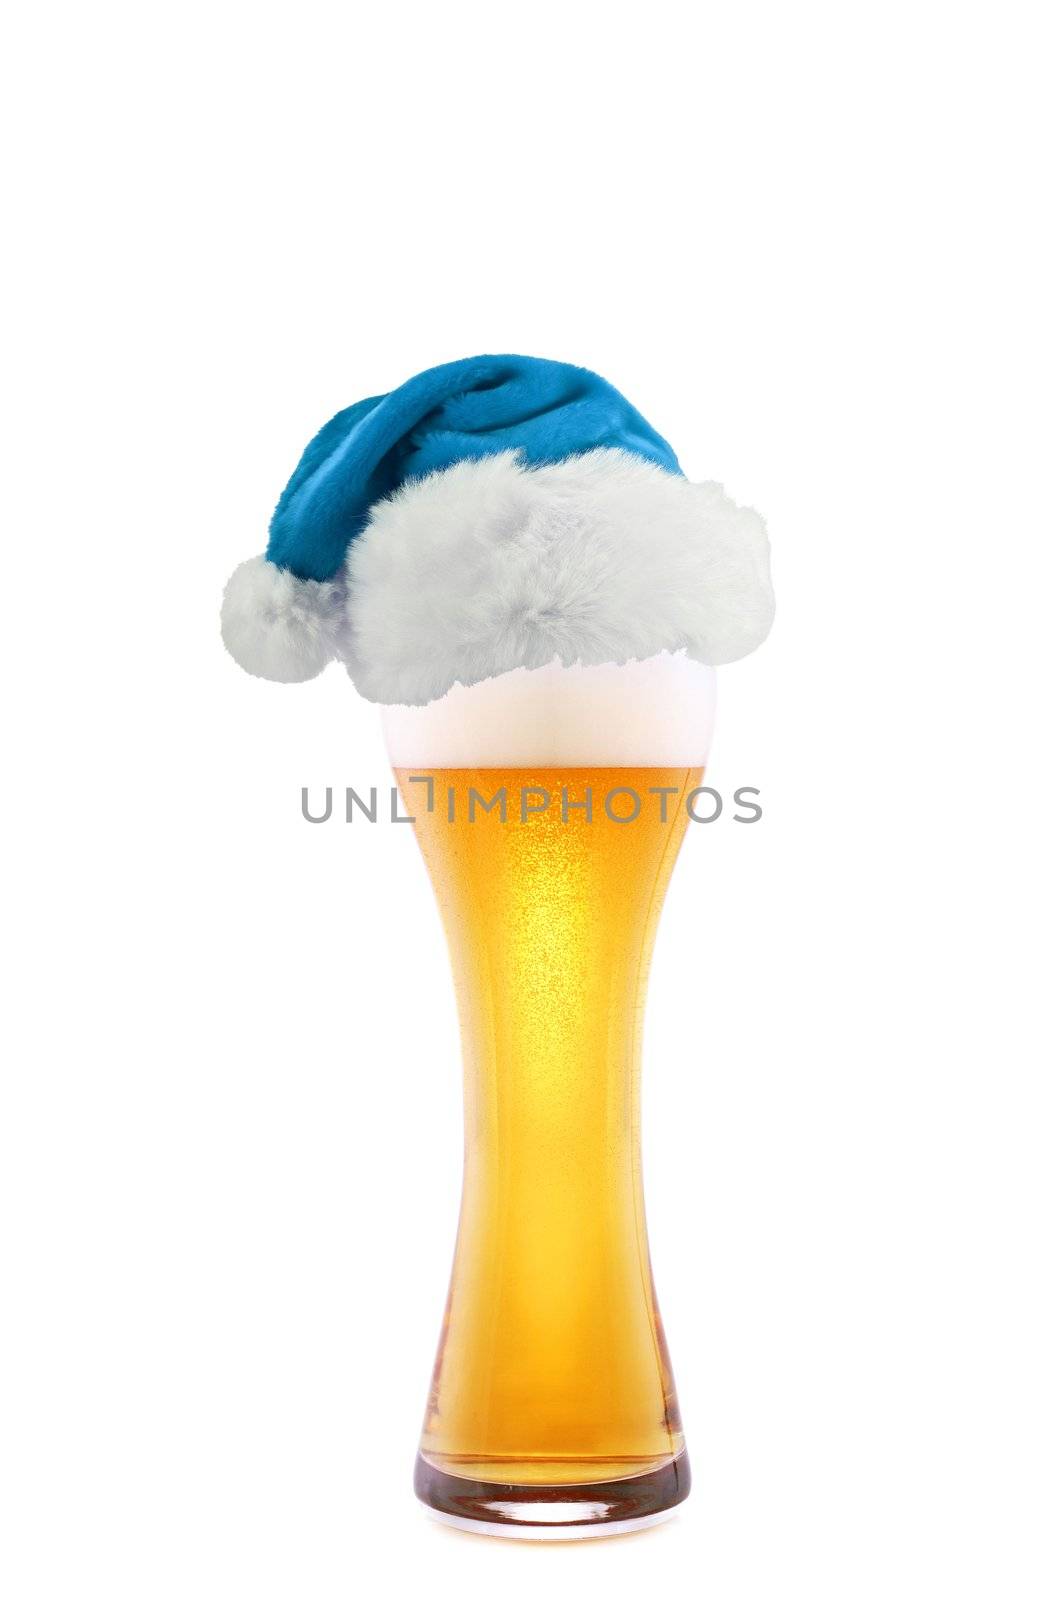 Santa Claus hat with beer by ozaiachin